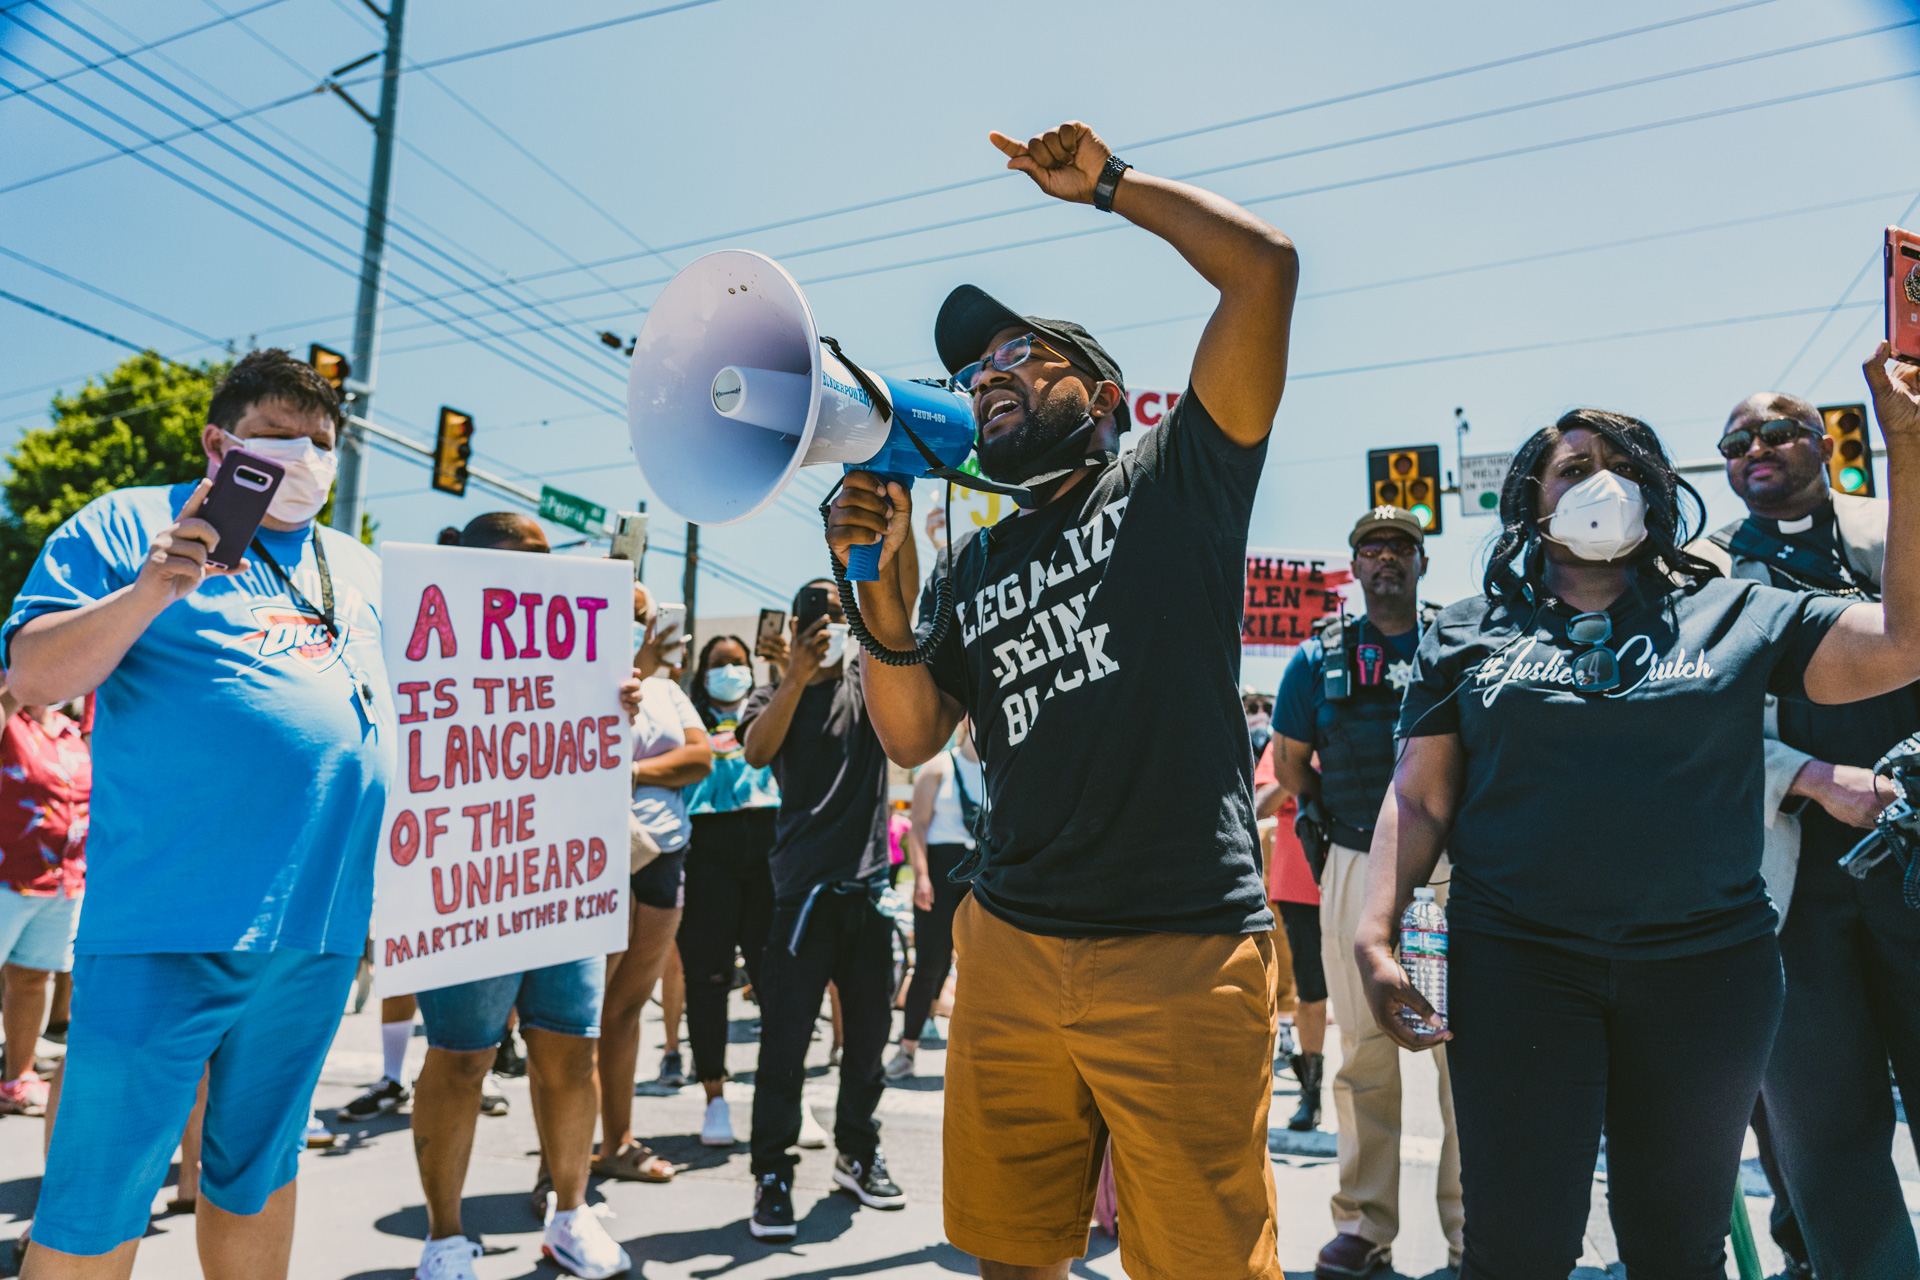 Tulsa activists Greg Robinson and Tiffany Crutcher lead peaceful protests in the wake of George Floyd's death on May 31, 2020.